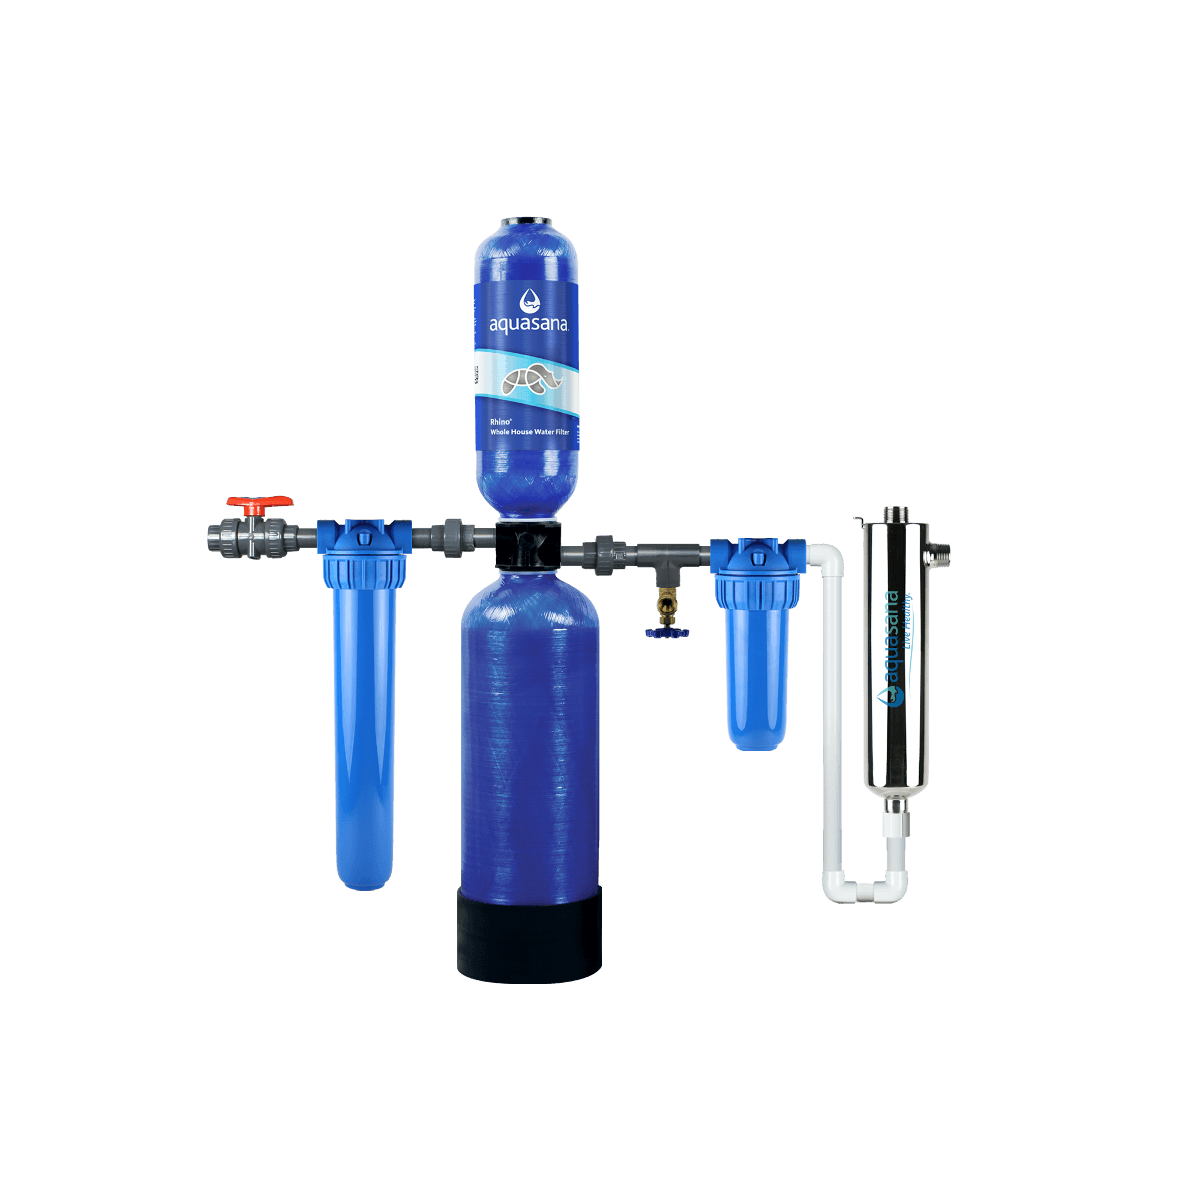 Rhino® Whole House Water UV Filter System Home Water Filtration 1 Million Gallon Removes 99% of Bacteria & Viruses Aquasana